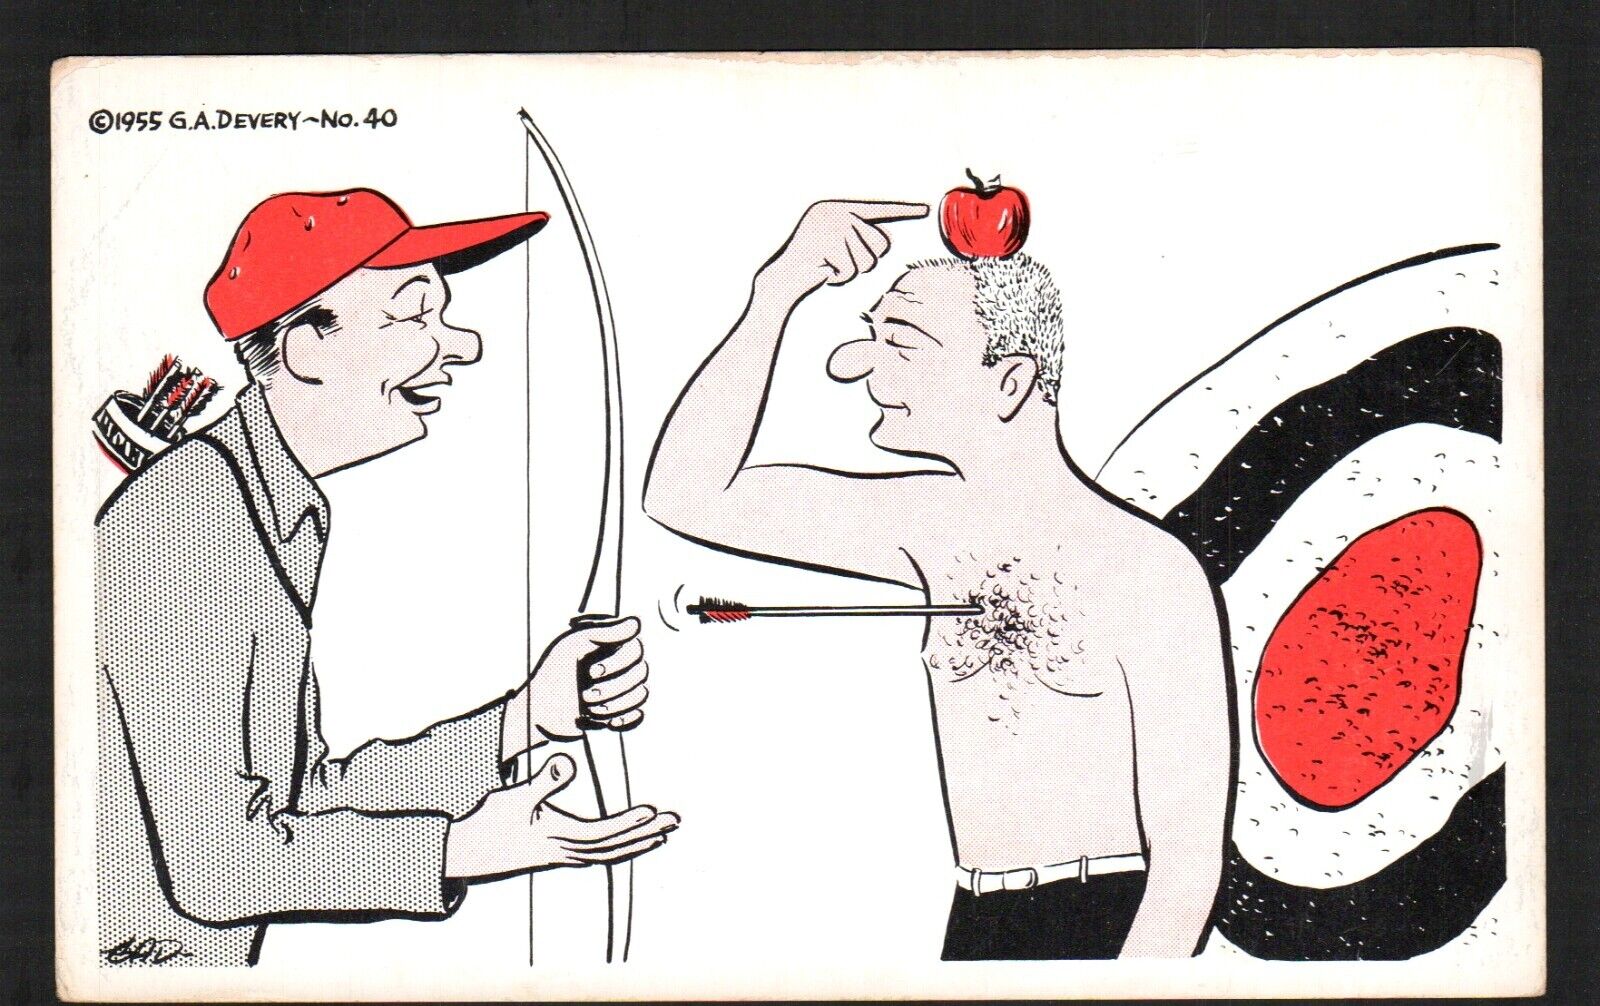 Old Humor Postcard Archery Bow Arrow Shooting Apple Target from Head 1955 Devery